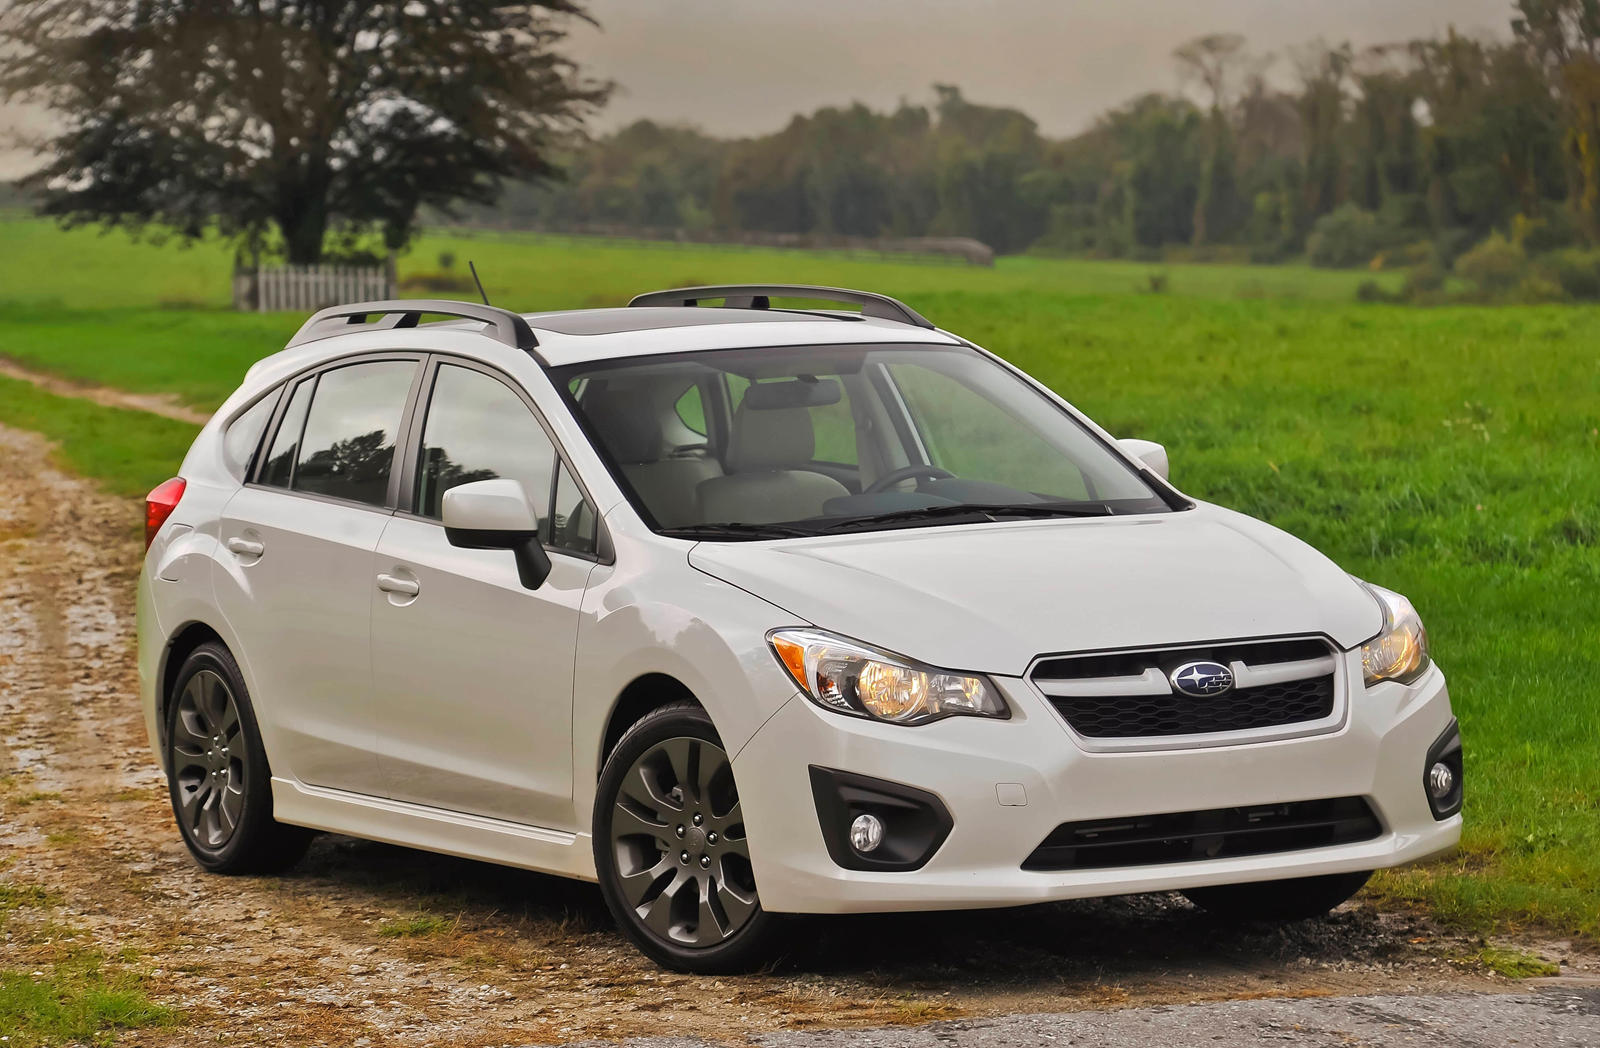 2012 Subaru Impreza Hatchback: Review, Trims, Specs, Price, New Interior Features, Design, and Specifications | CarBuzz